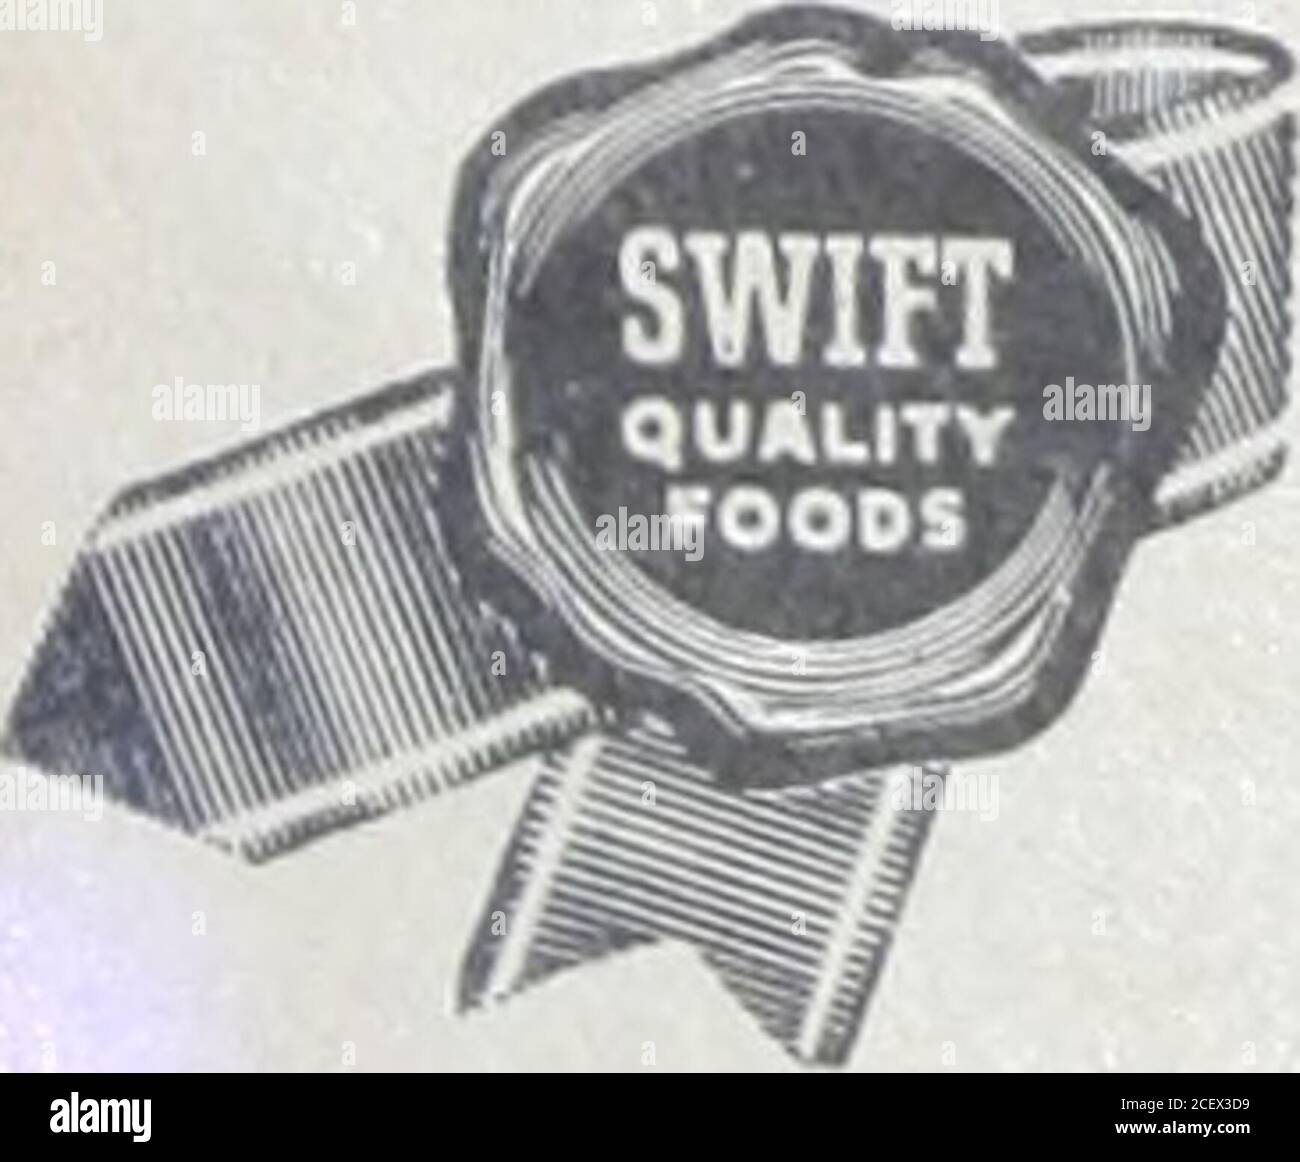 . The Ladies' home journal. SWIFT & COMPANY • CHICAGO 9, ILLINOIS SWIFT... -foremostname is? meats All nutritional statements madein this advertisement are acceptedby the Council on Foods and Nutri-tion of the American Medical As-sociation. Stock Photo